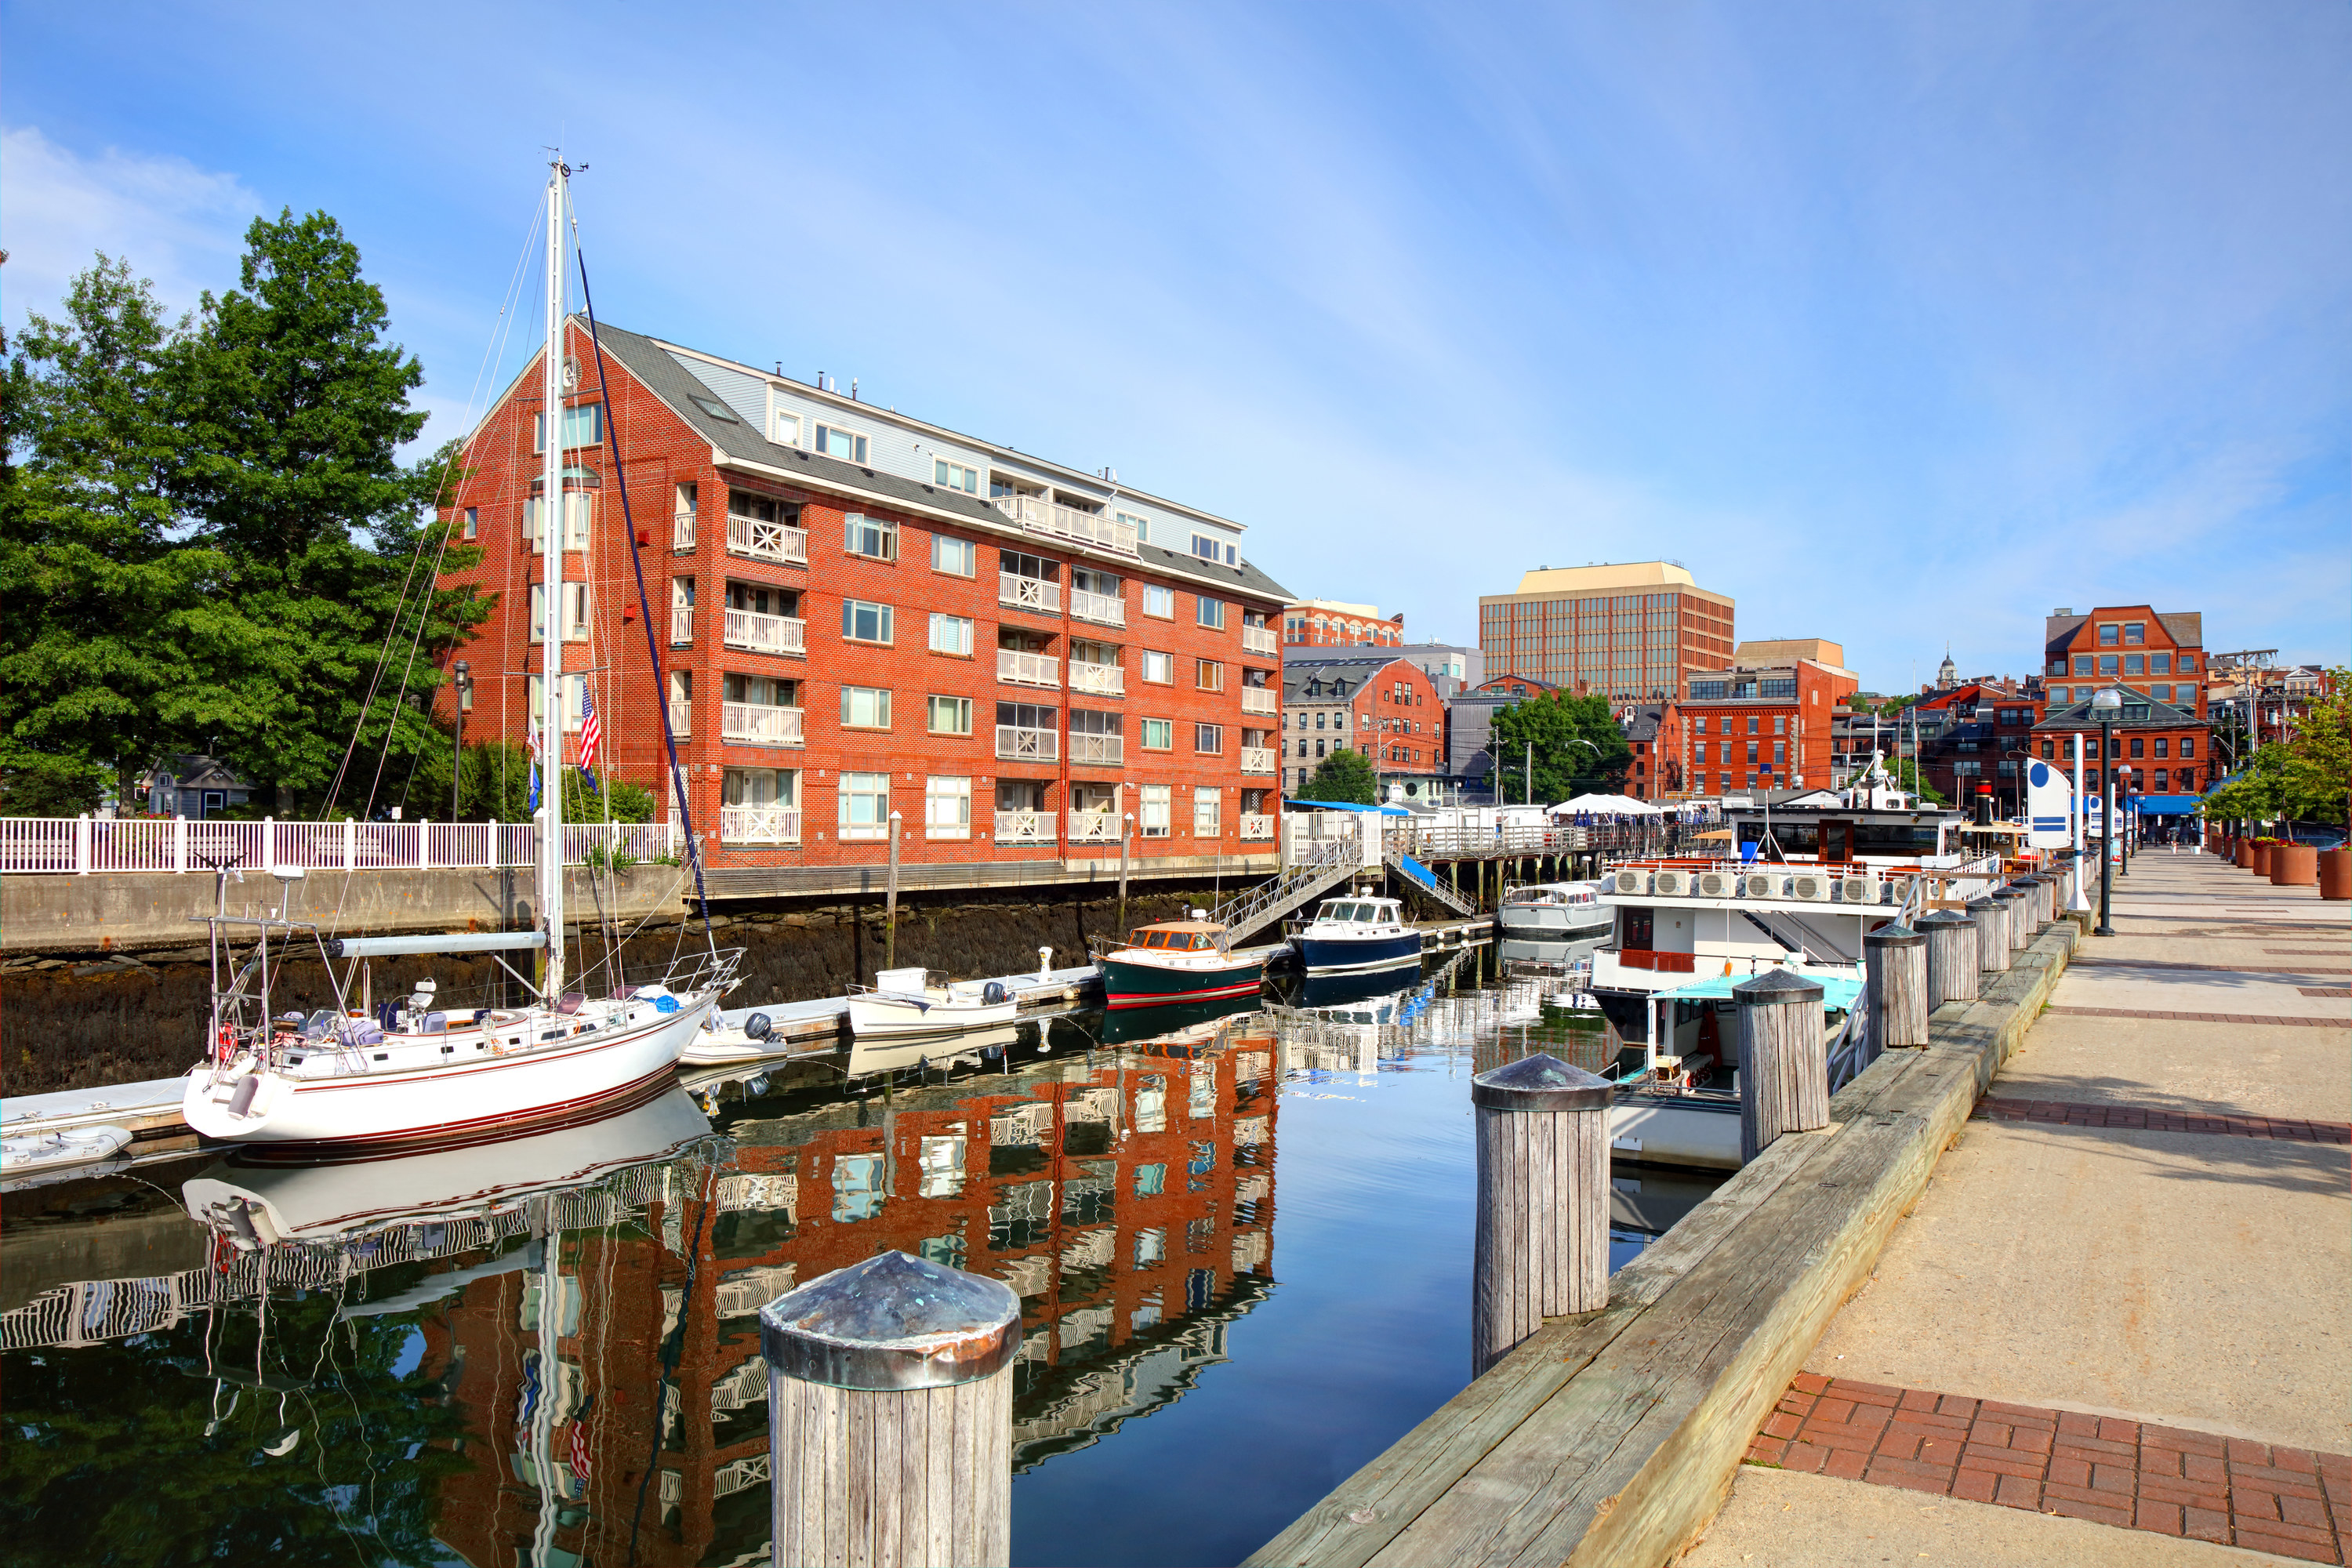 Dock near a canal in portland, lined with different sailboats and near apartment buildings